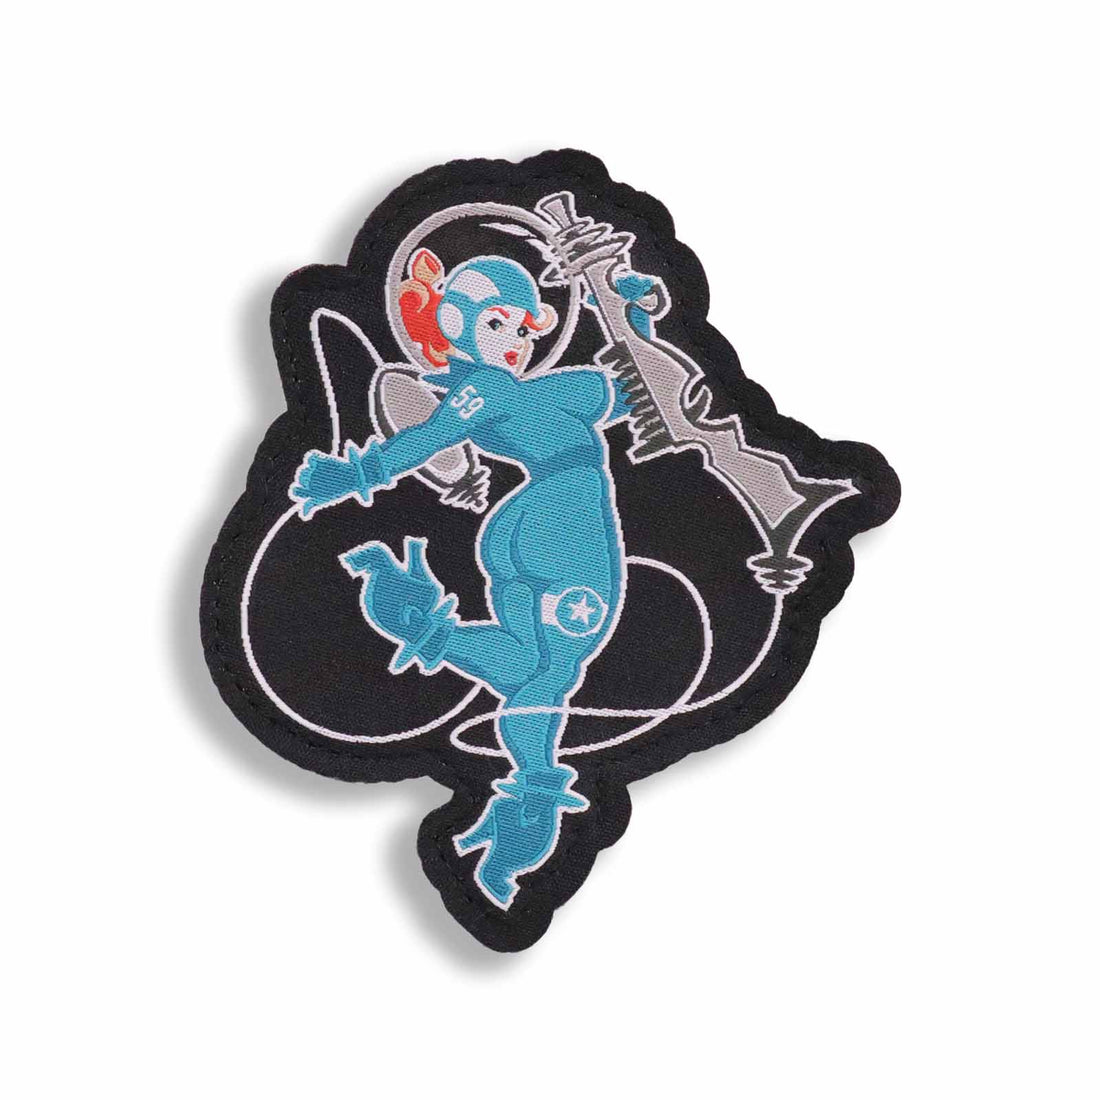 Supplies - Identification - Morale Patches - Mil-Spec Monkey Space Girl 1 Morale Patch